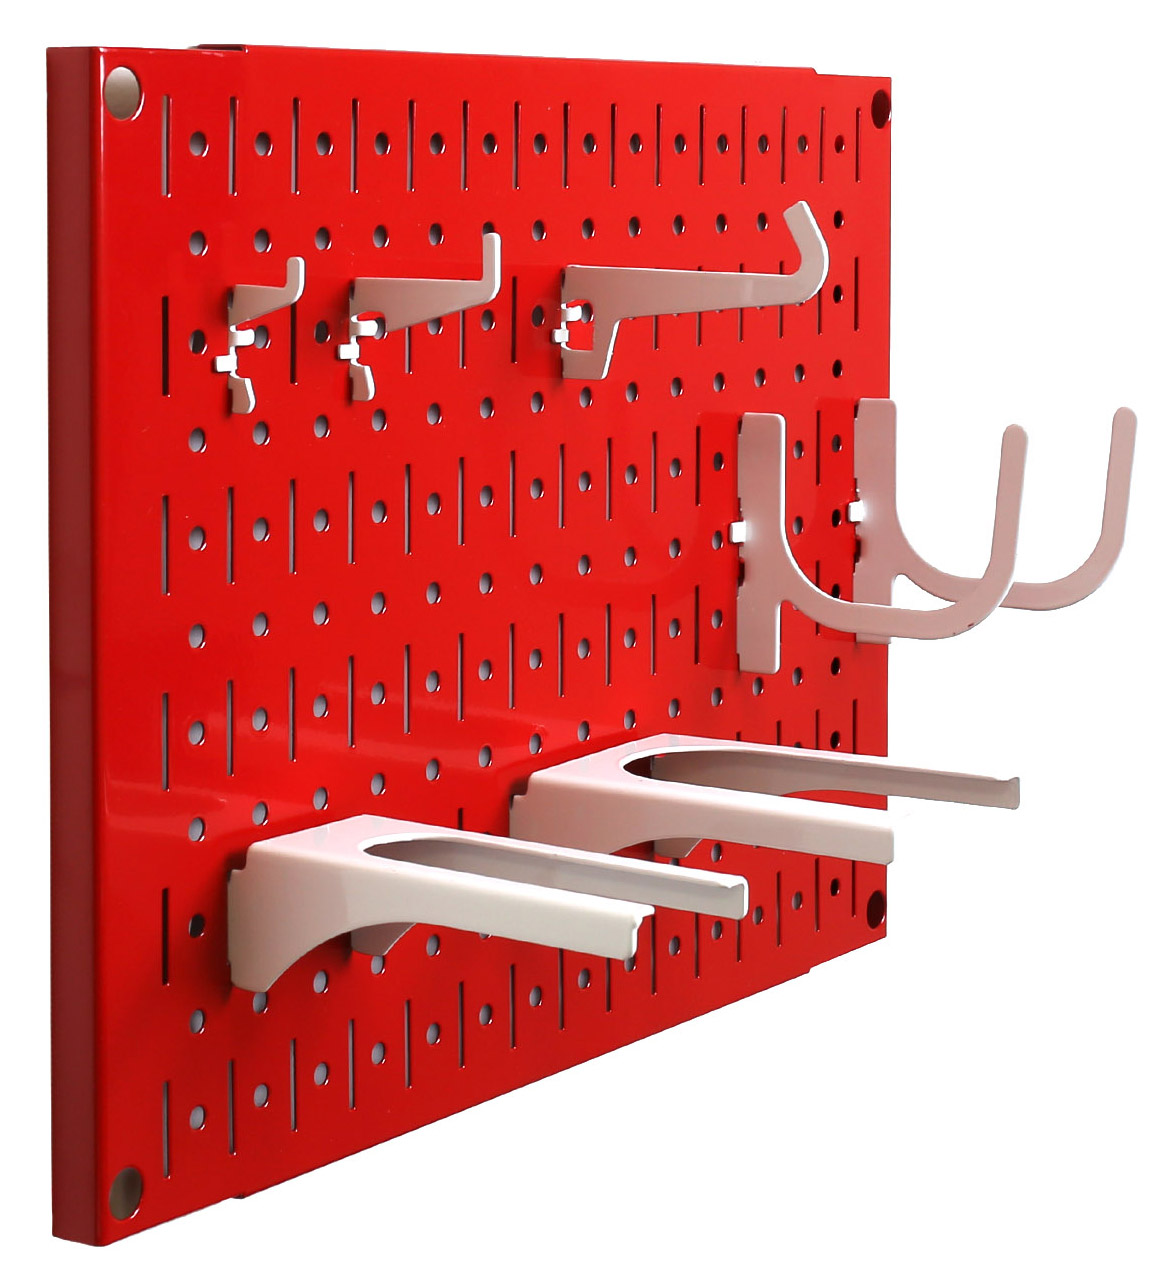 Pegboard Wall Organizer Tiles - Wall Control Modular Metal Pegboard Tiling Set - Four 12-Inch Tall x 16-Inch Wide Red Peg Board Panel Wall Storage Tiles - Easy to Install (Red) - image 4 of 10